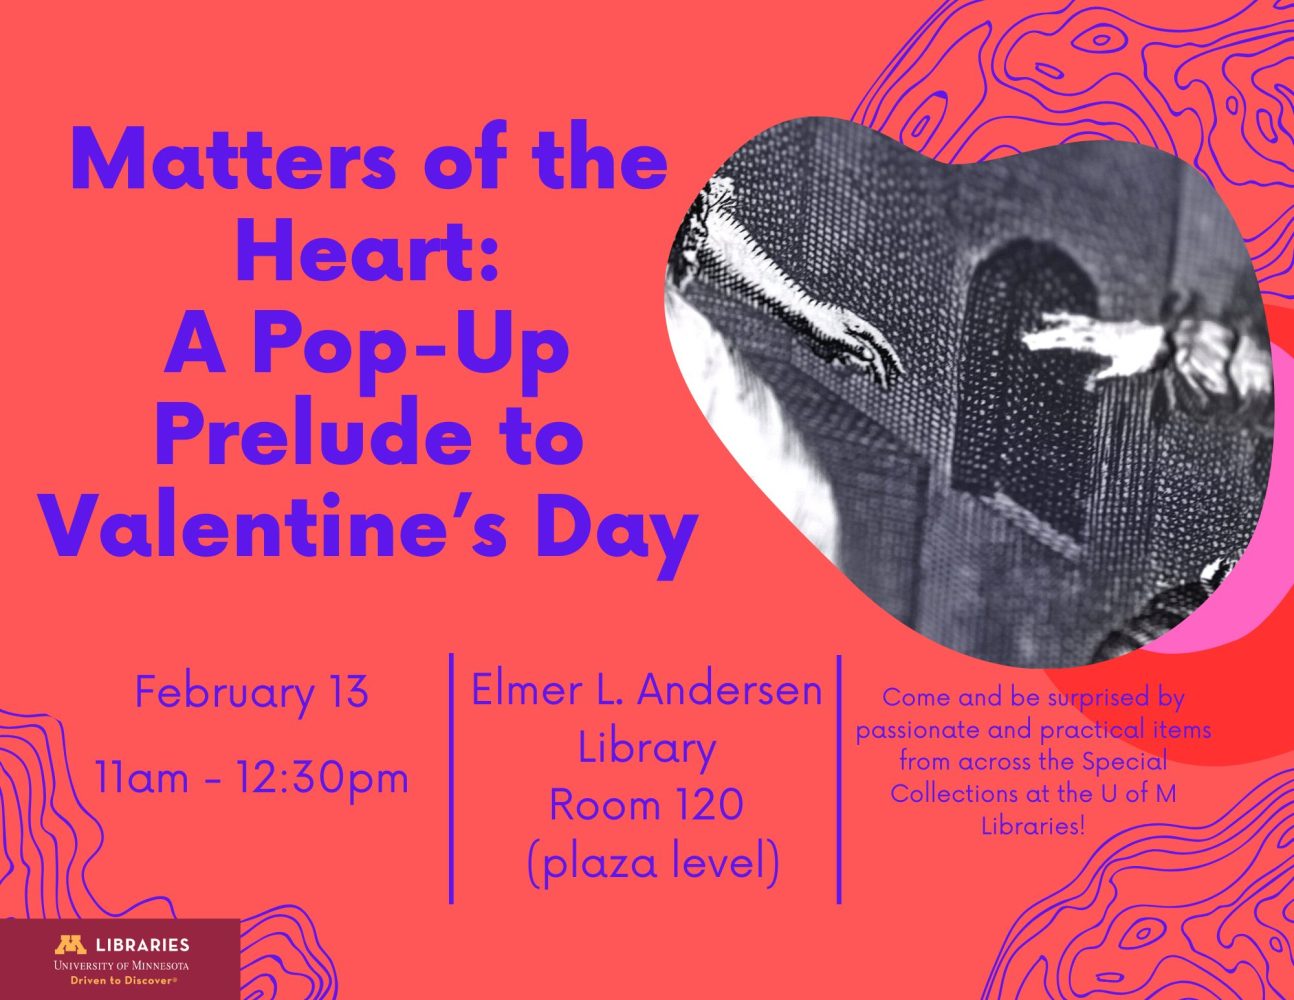 Matters of the Heart: A Pop-Up Prelude to Valentine's Day flier, Feb. 13 at Elmer L. Andersen Library from 11 a.m.-12:30 p.m.